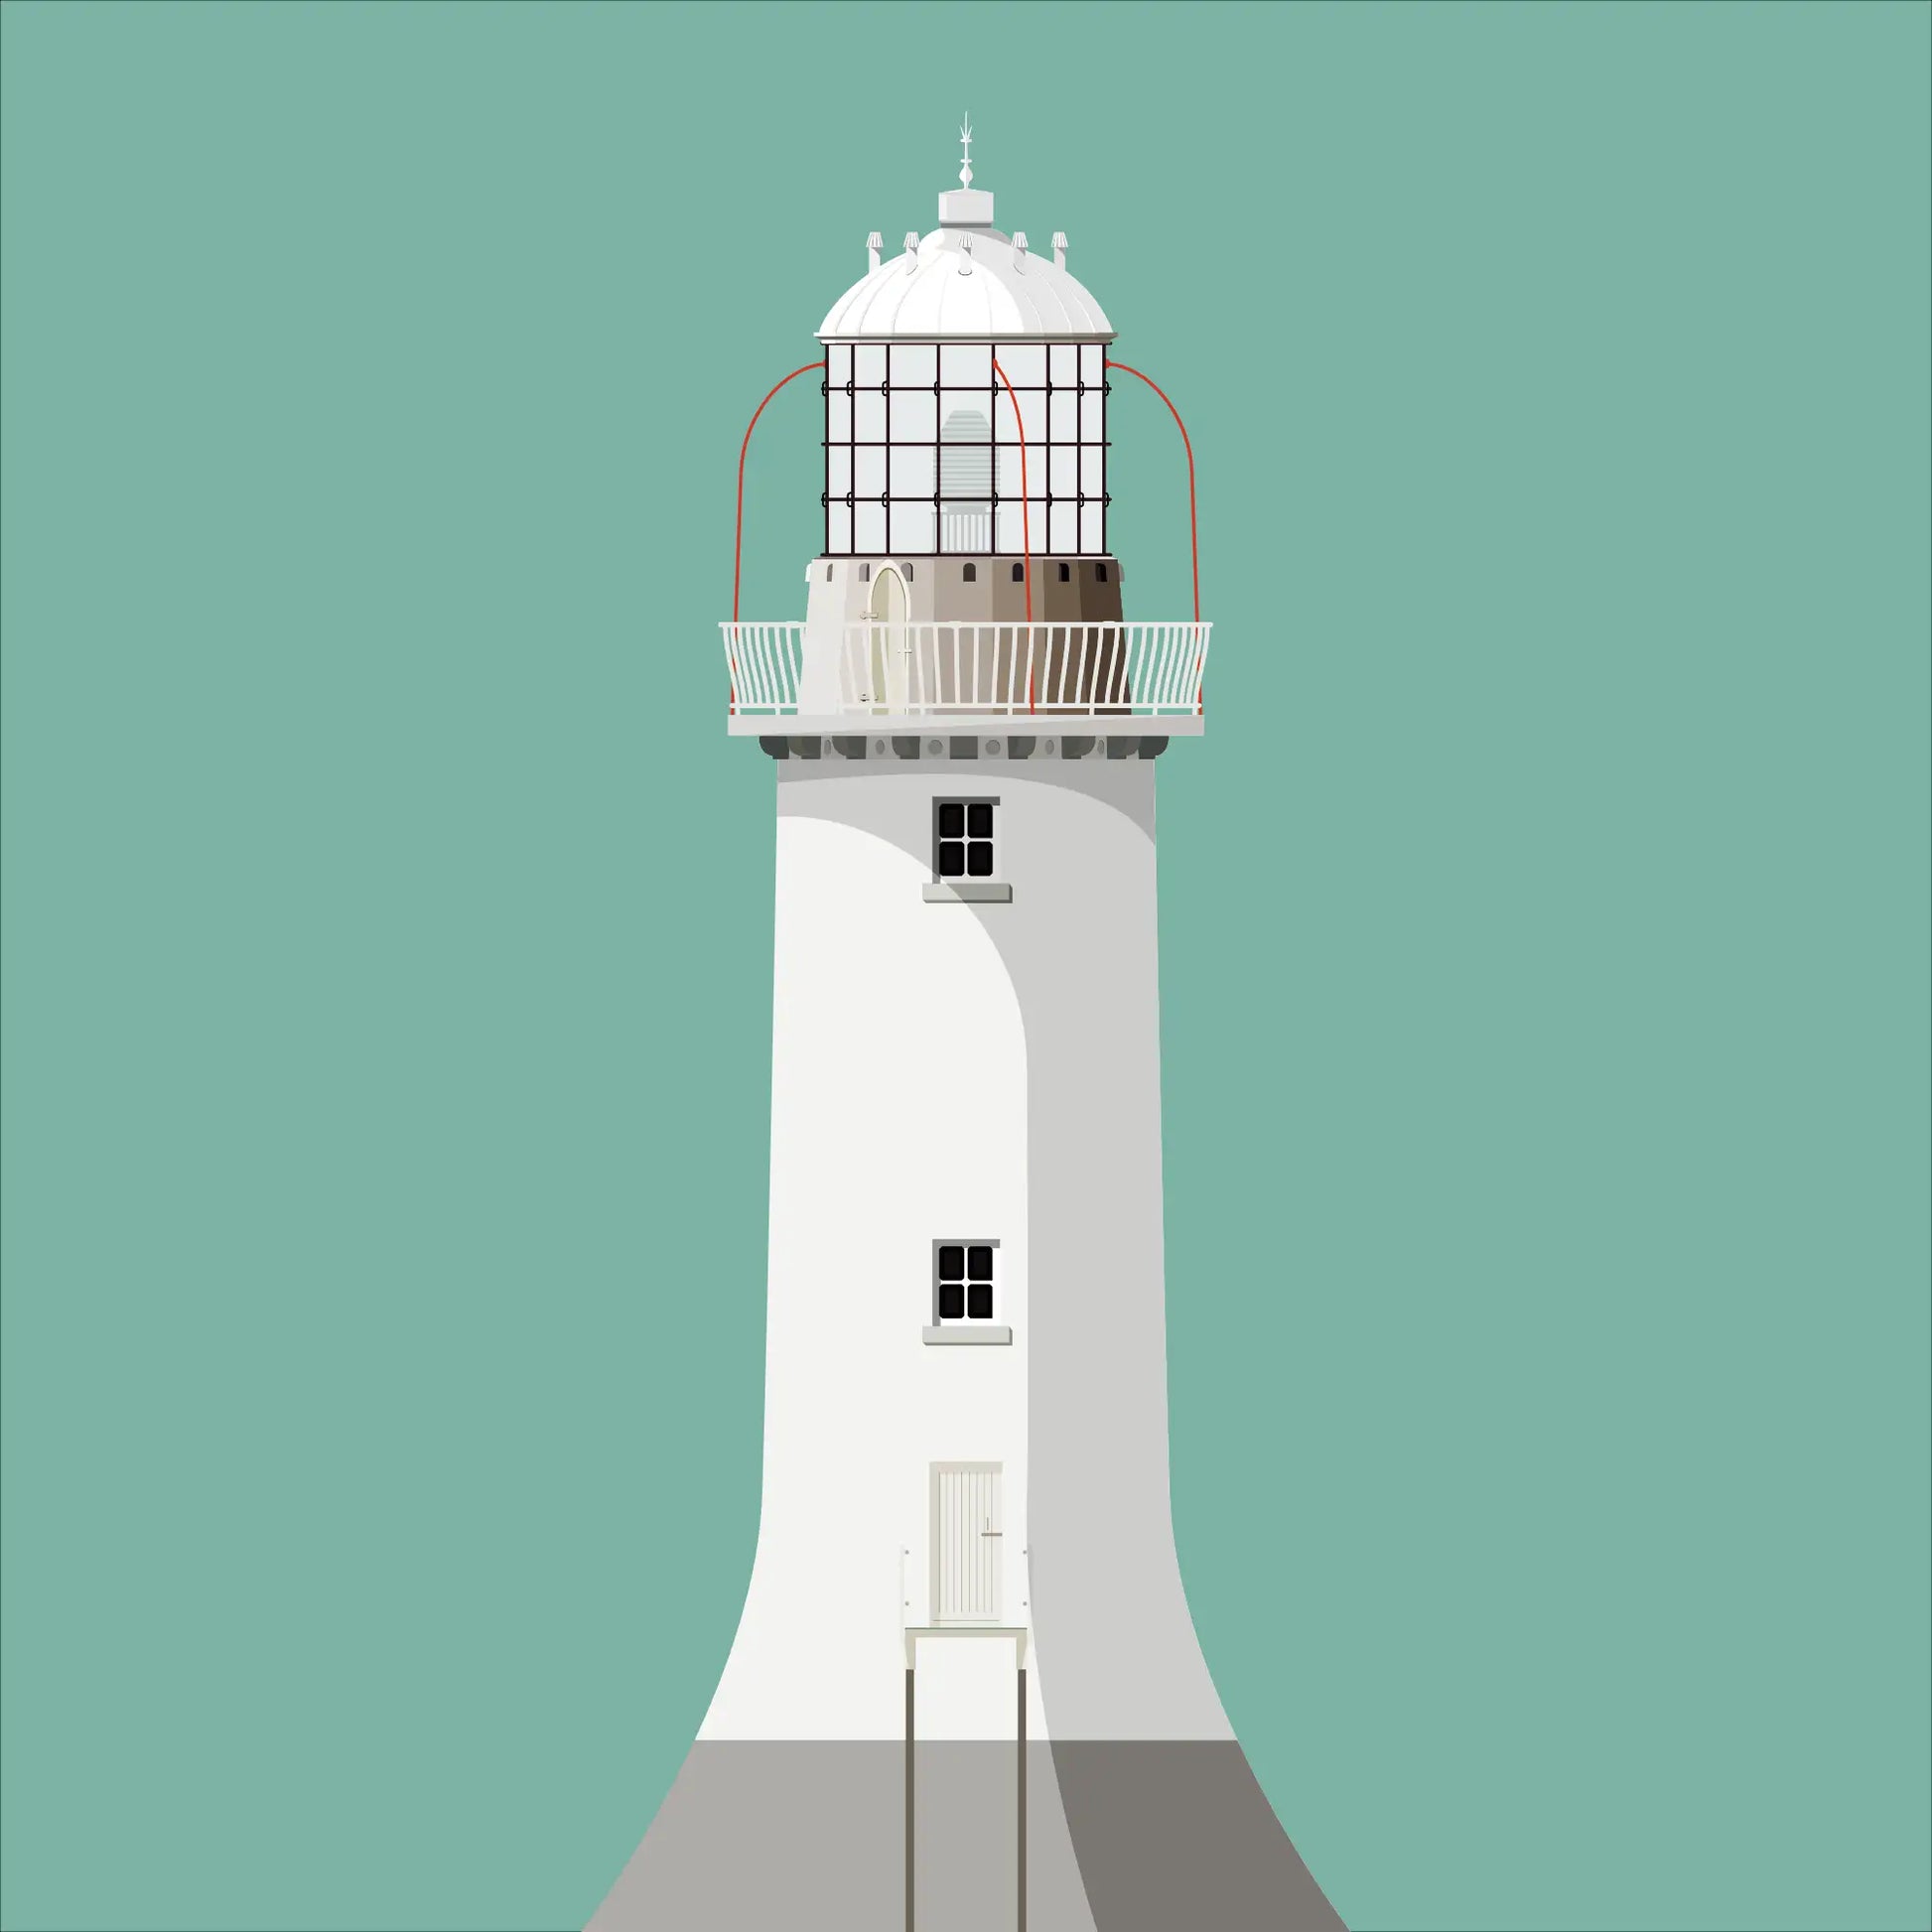 Contemporary graphic illustration of Tarbert lighthouse on a white background inside light blue square.